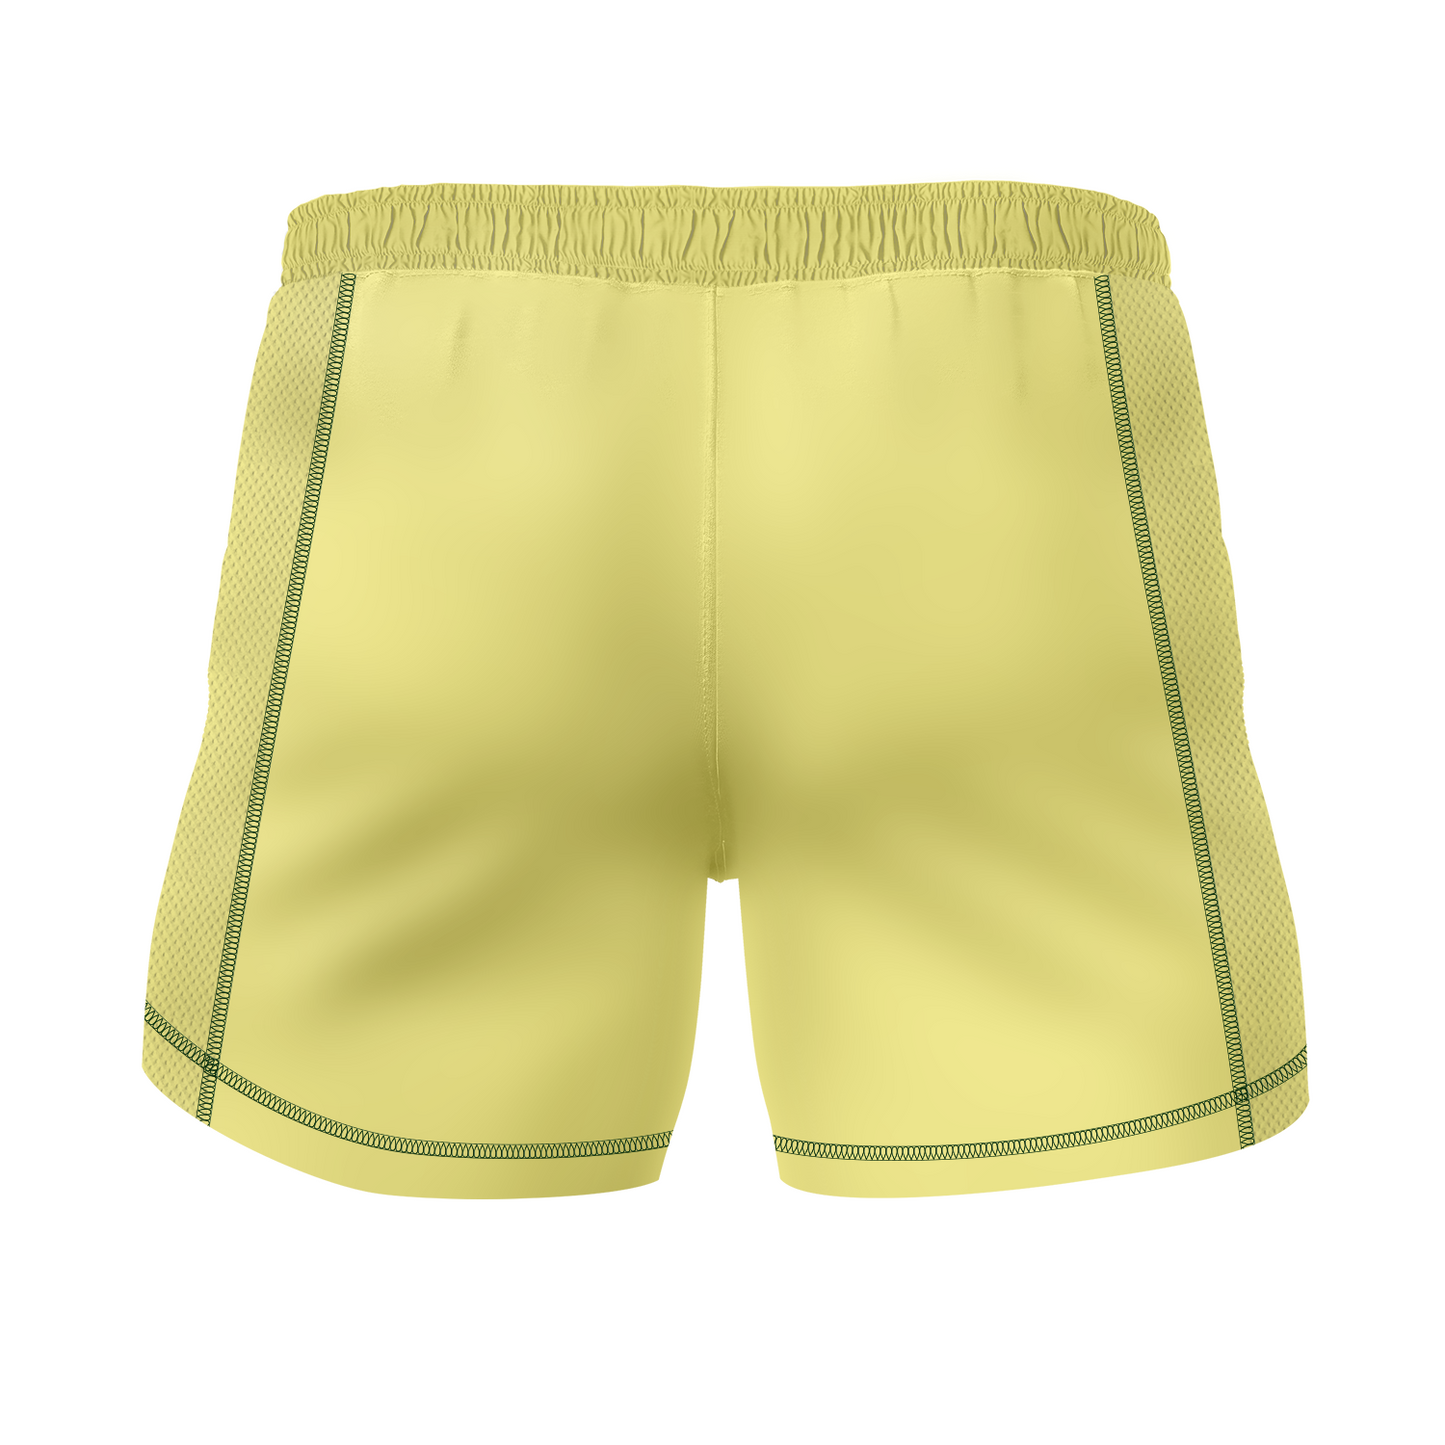 Rogue Wave men's fight shorts Vintage Gator, yellow